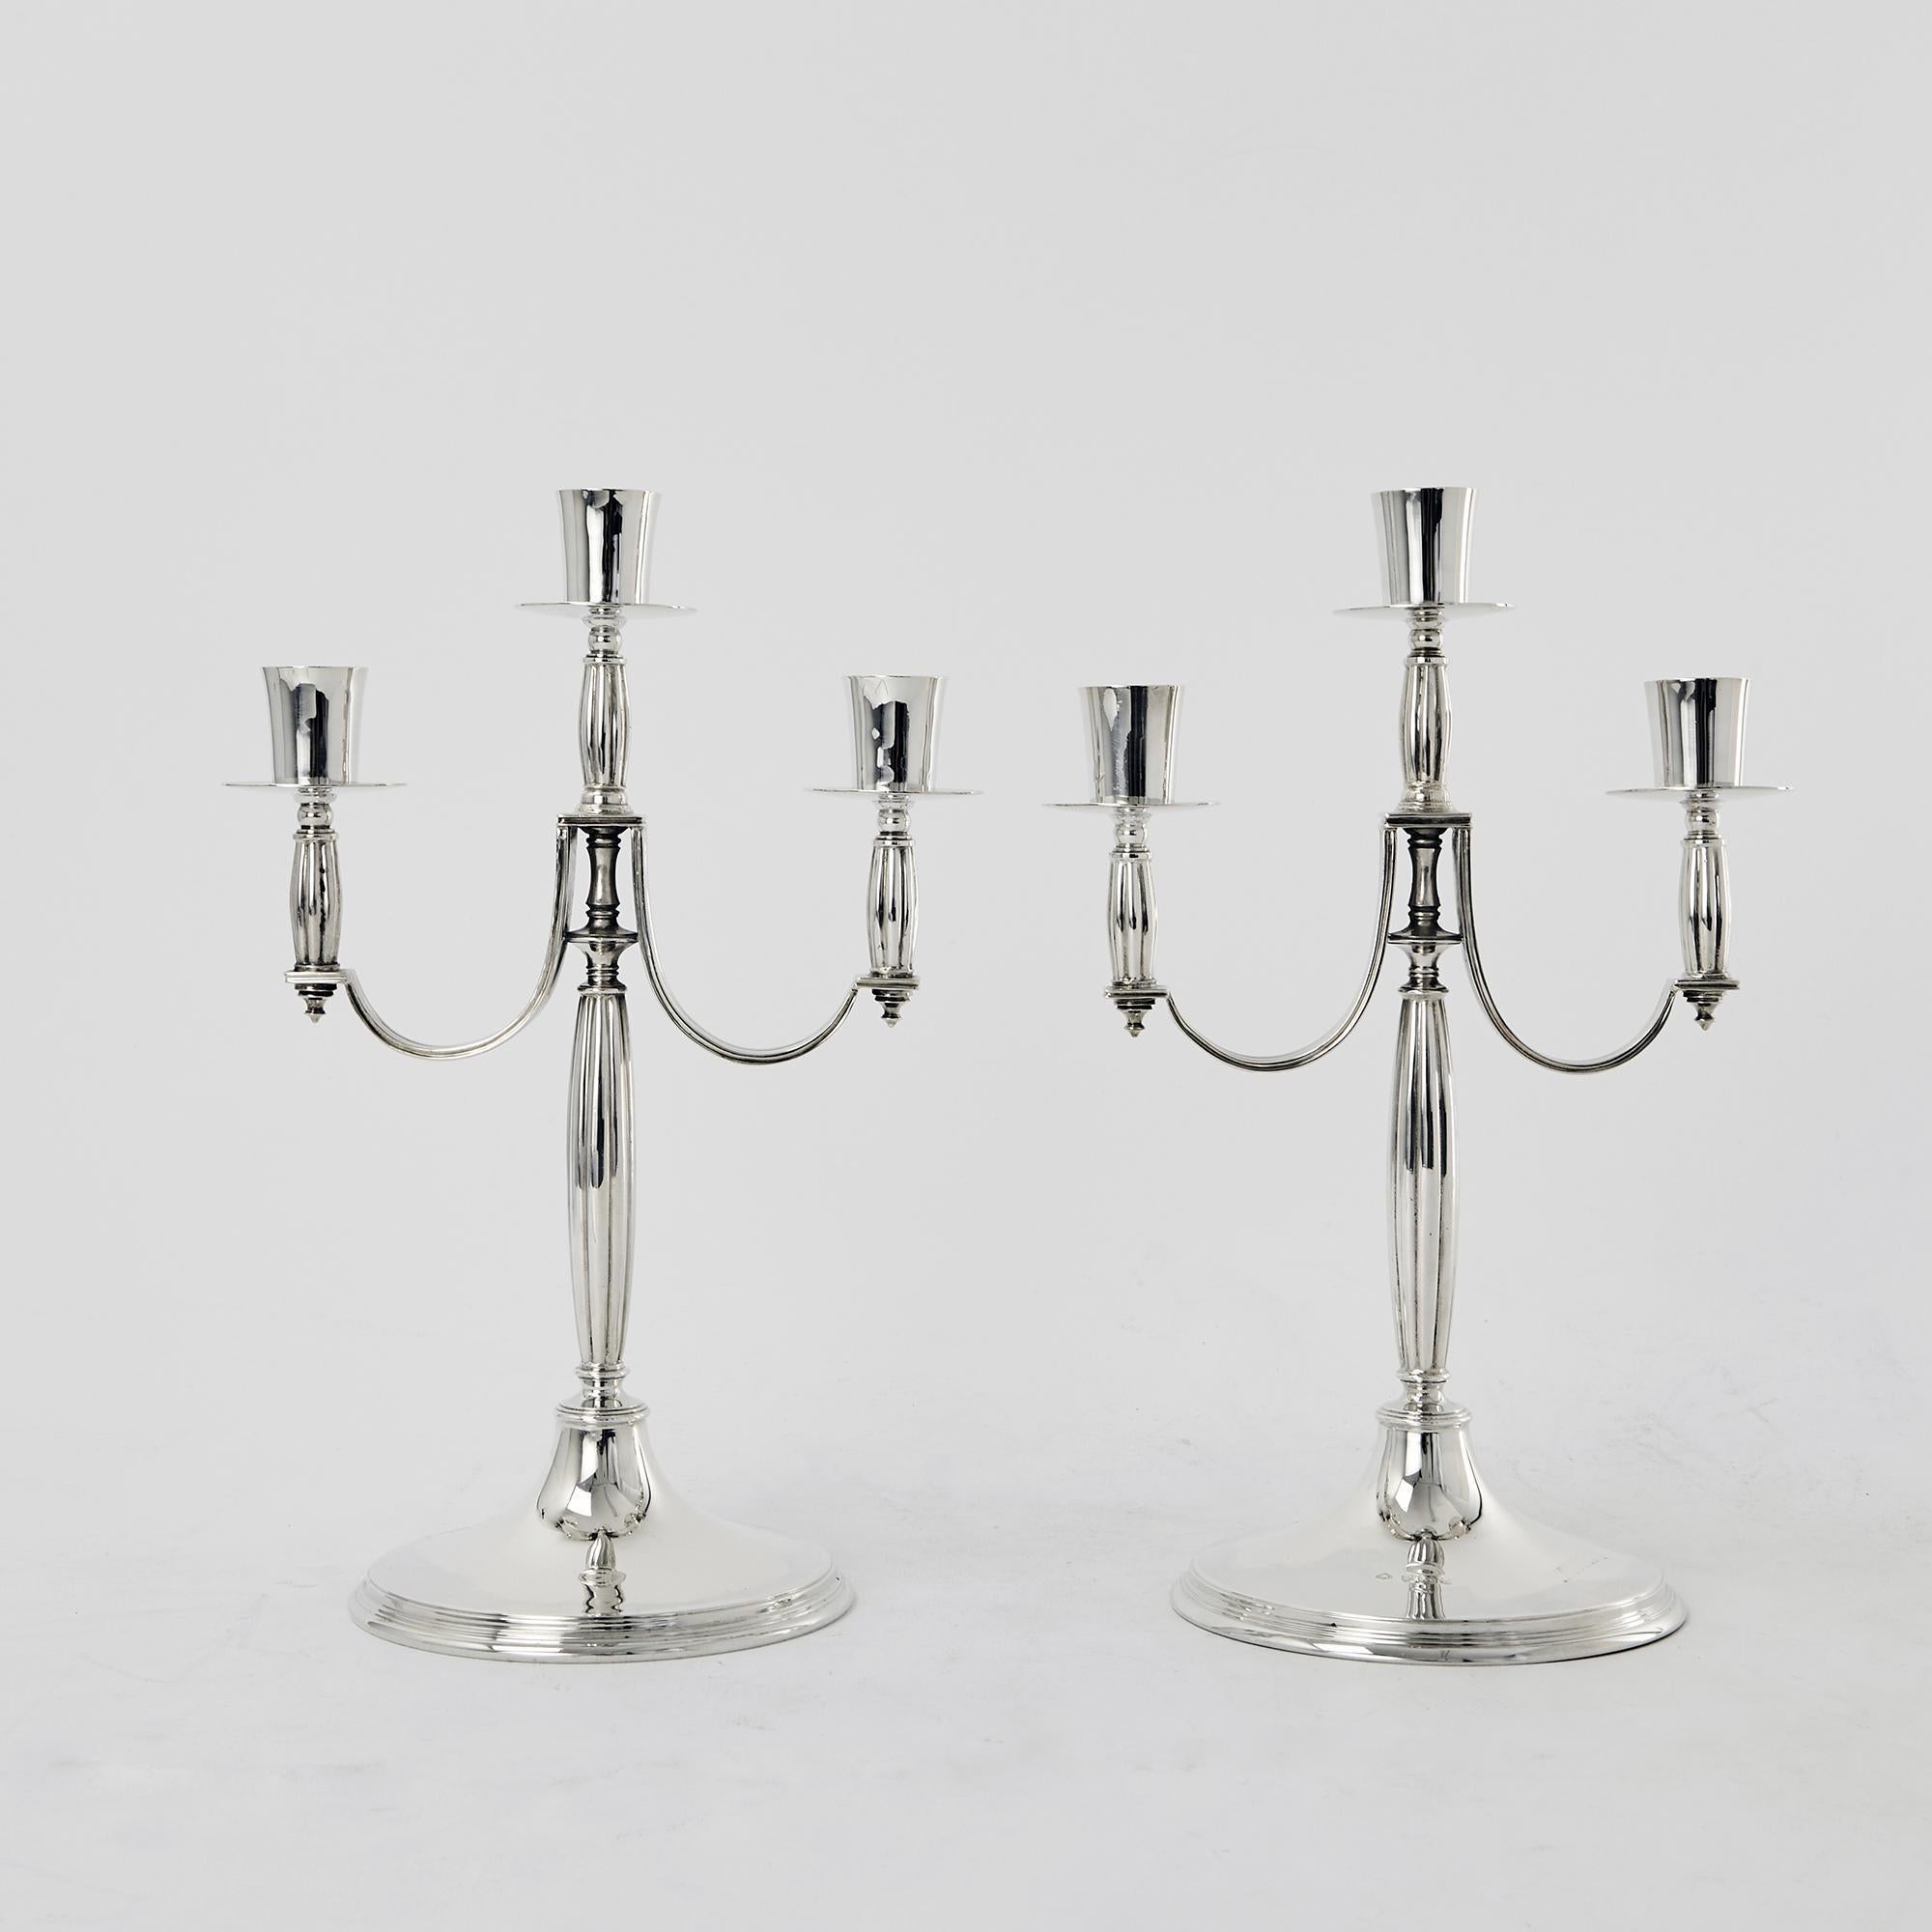 A pair of unusual and wonderful quality three-light sterling silver candelabra in the Art Deco style with round bases supporting fluted stems with similarly fluted flat arms. These heavy quality candlesticks are made in cast sections and are not